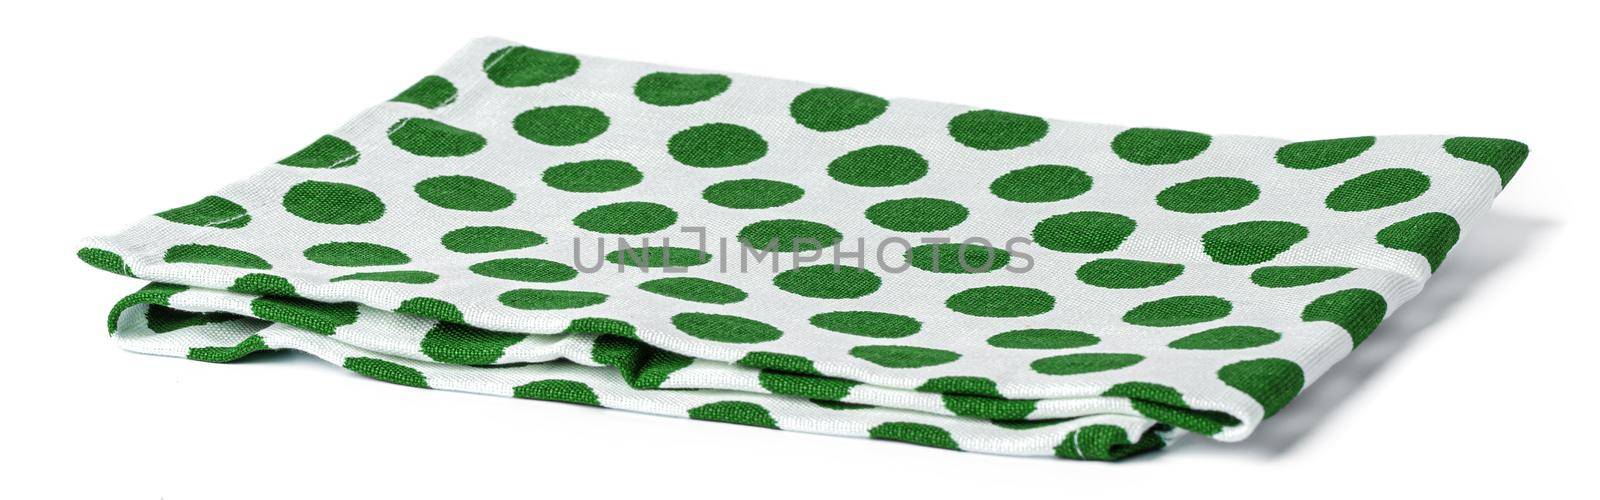 kitchen towel isolated on white background, close up by Fabrikasimf